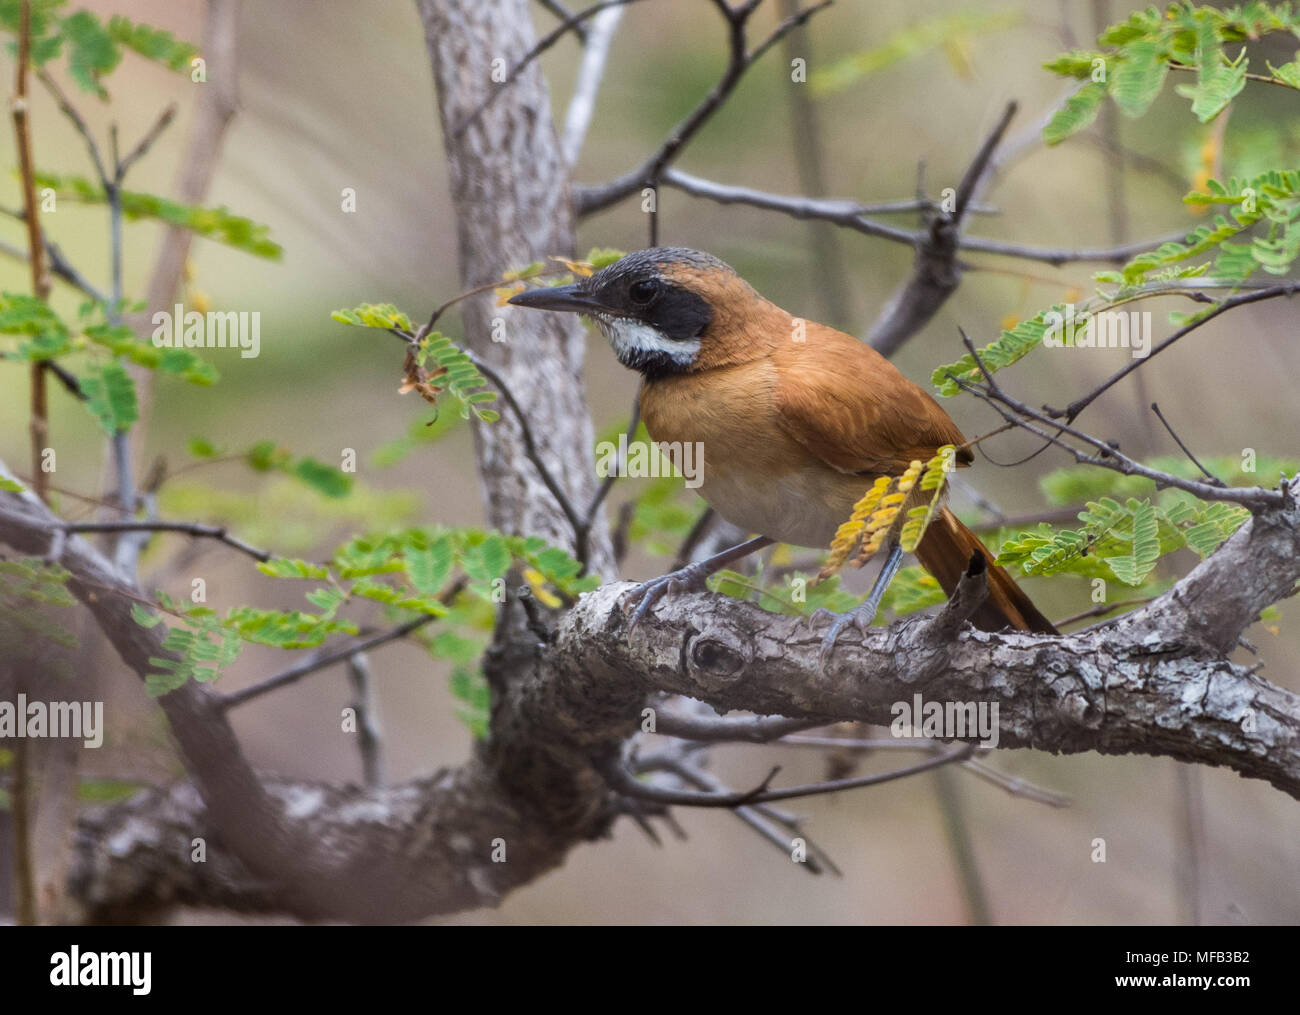 White-whiskered Spinetail (Synallaxis candei). Los Flamencos Sanctuary. Colombia, South America. Stock Photo